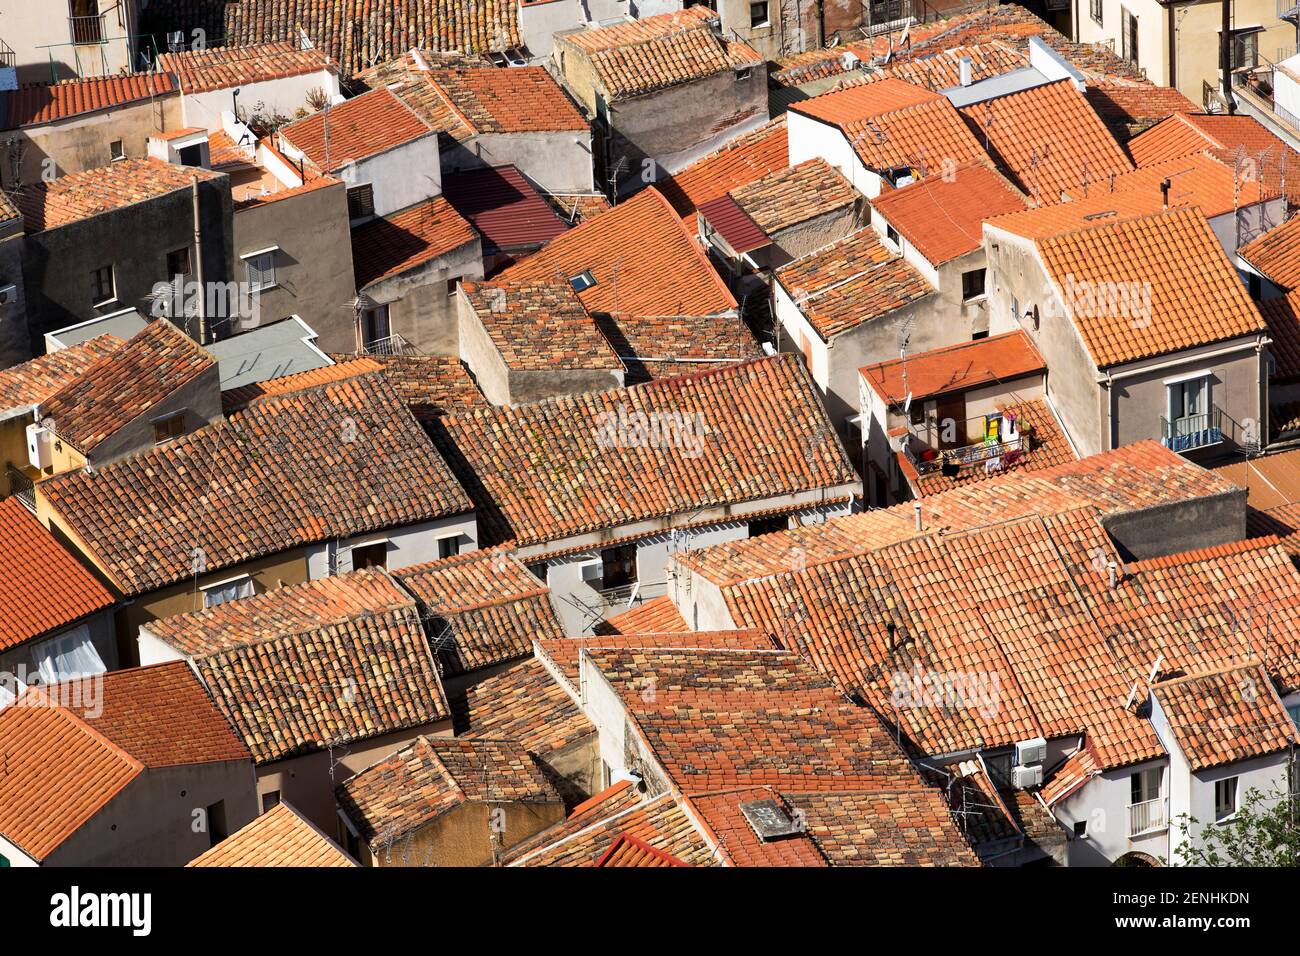 Italy,Sicily,Cefalu, aerial view of red tiled roofs in Cefalu Stock Photo